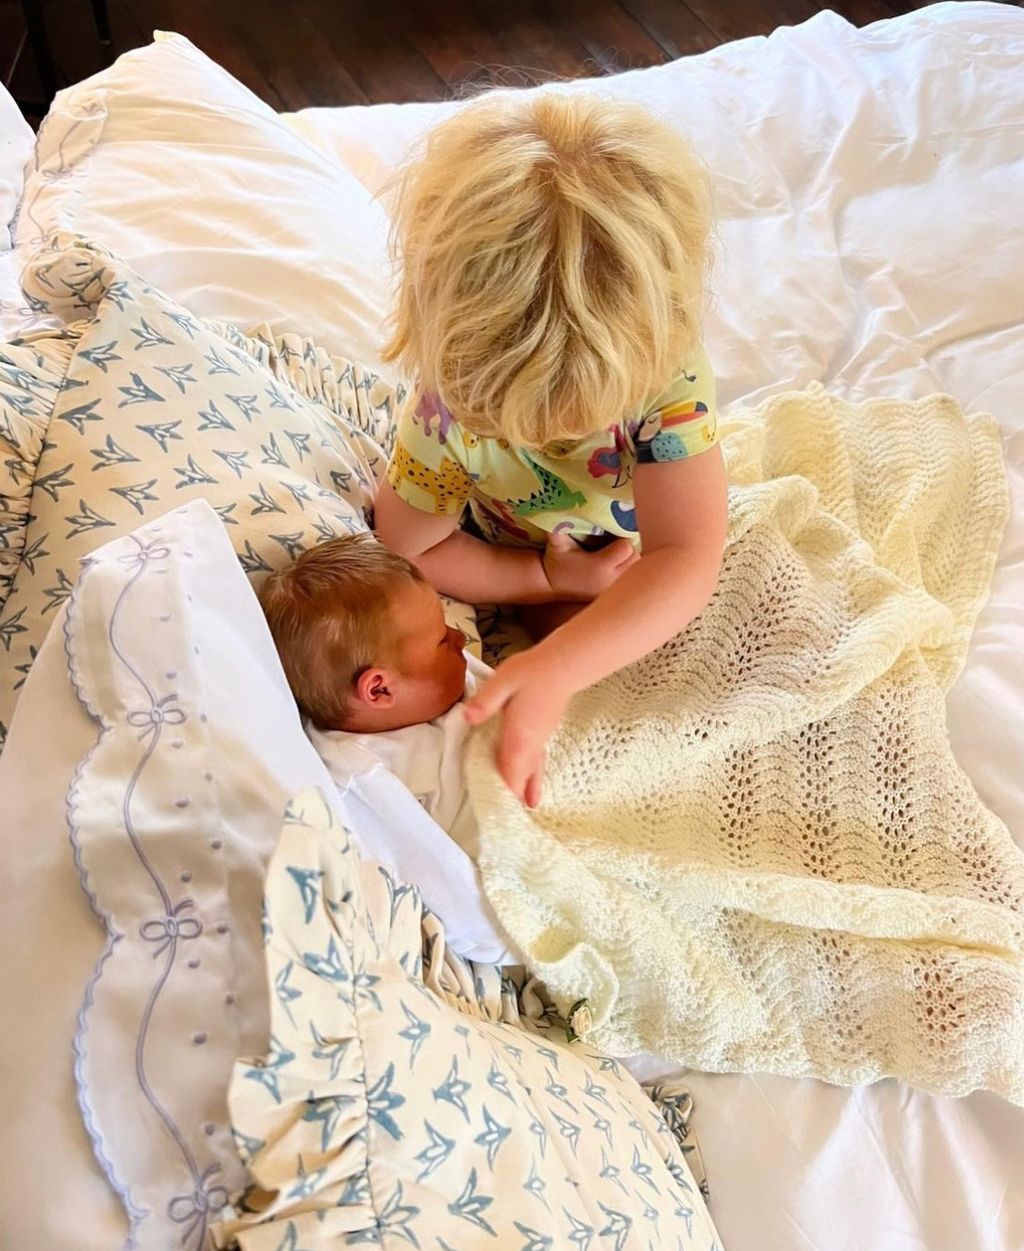 A blonde child putting a blanket over a baby